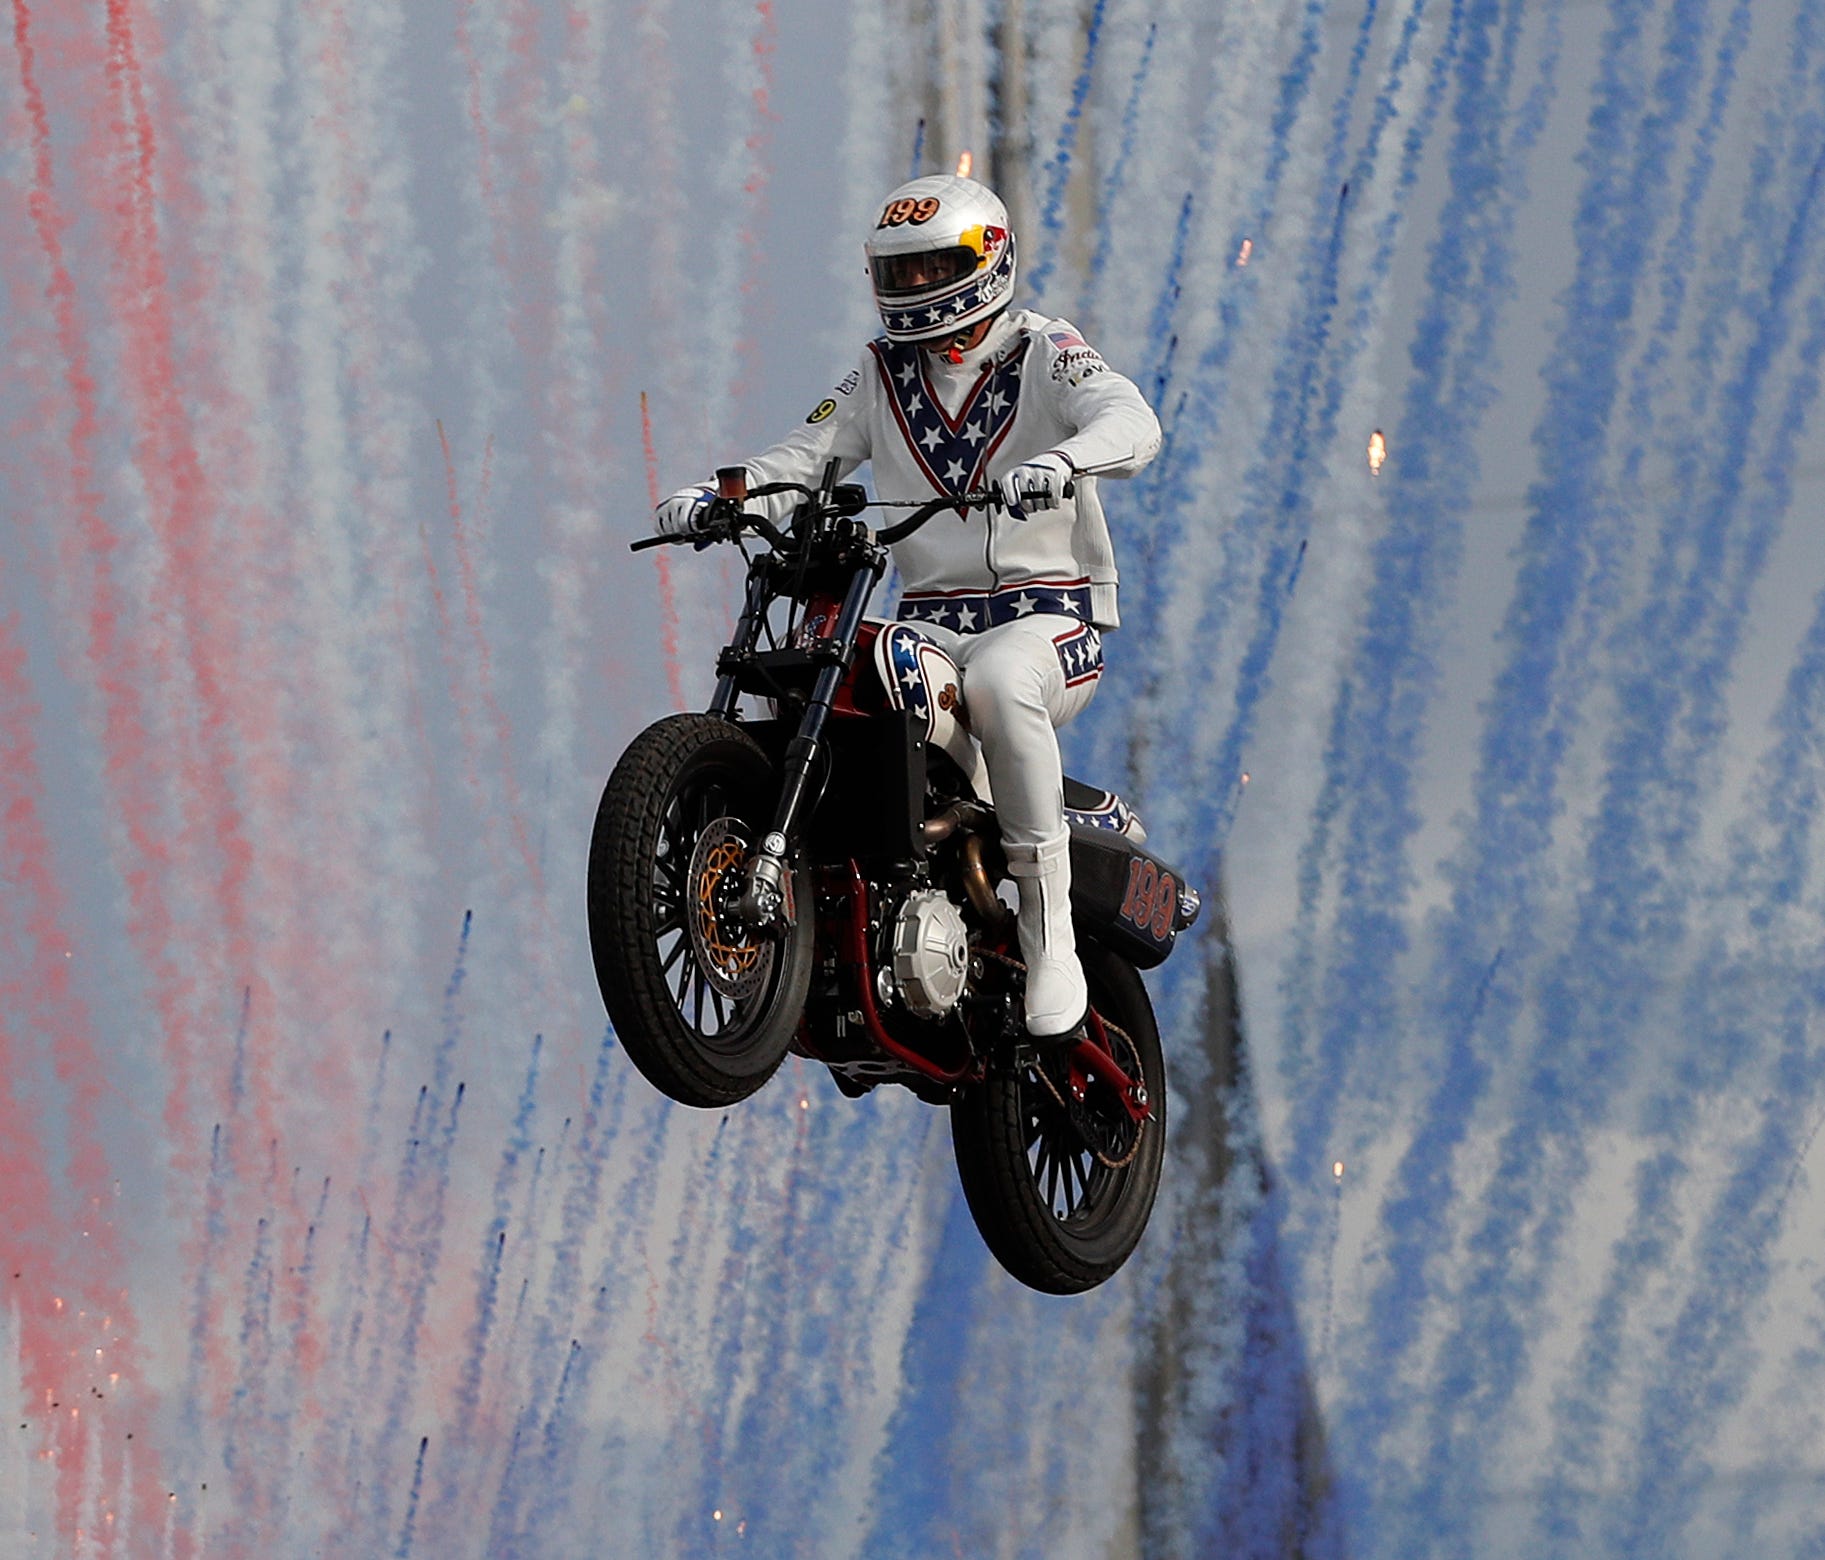 Travis Pastrana jumps a row of crushed cars on a motorcycle in Las Vegas.